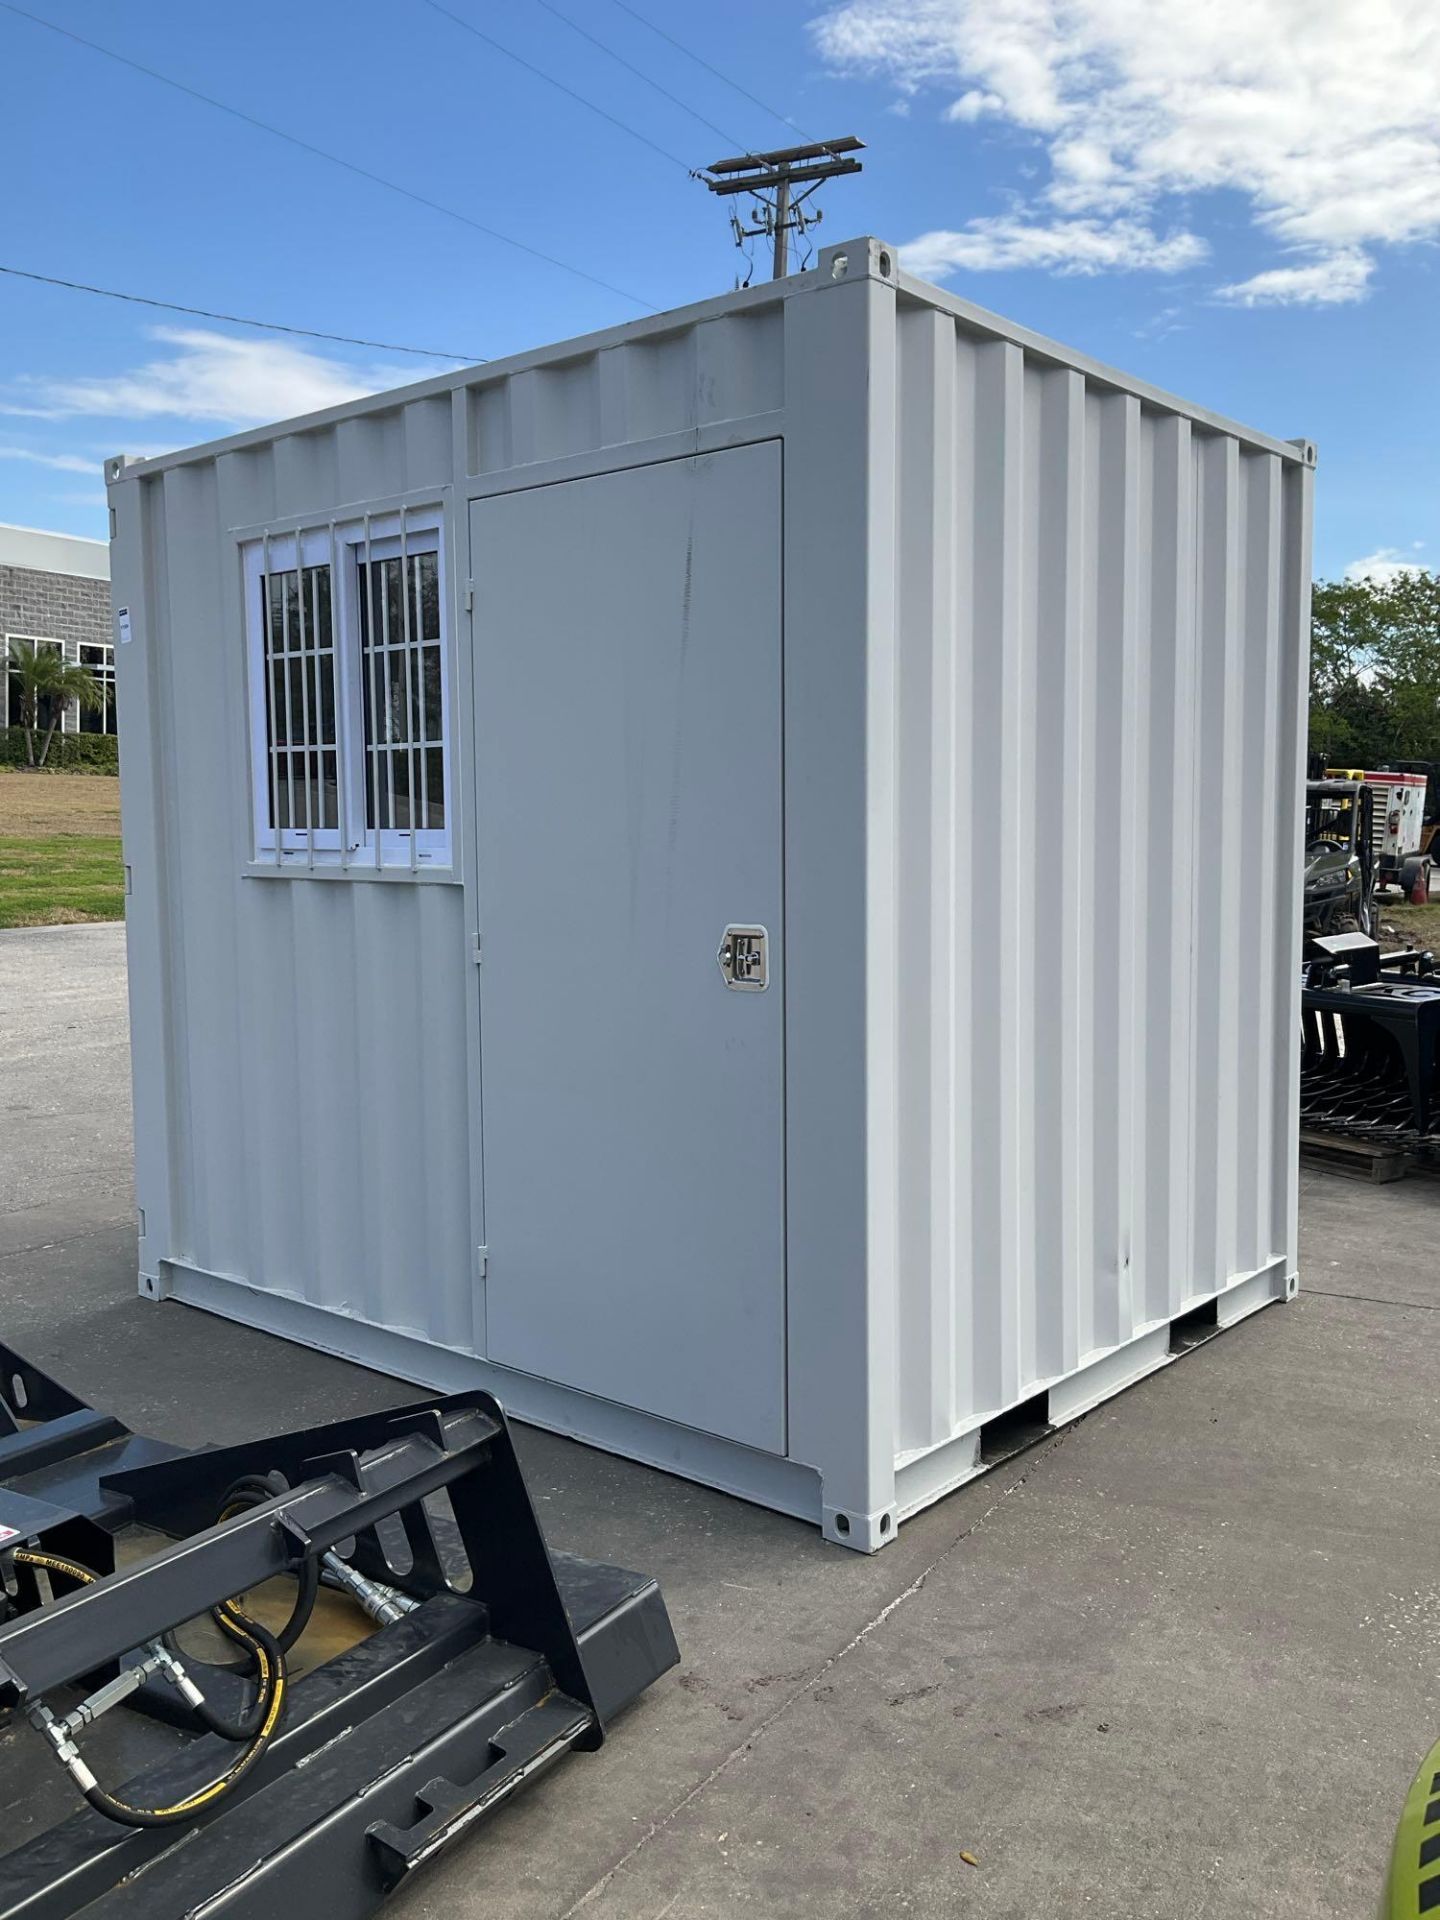 9' OFFICE / STORAGE CONTAINER, FORK POCKETS WITH SIDE DOOR ENTRANCE & SIDE WINDOW, APPROX 99'' T x - Image 3 of 11